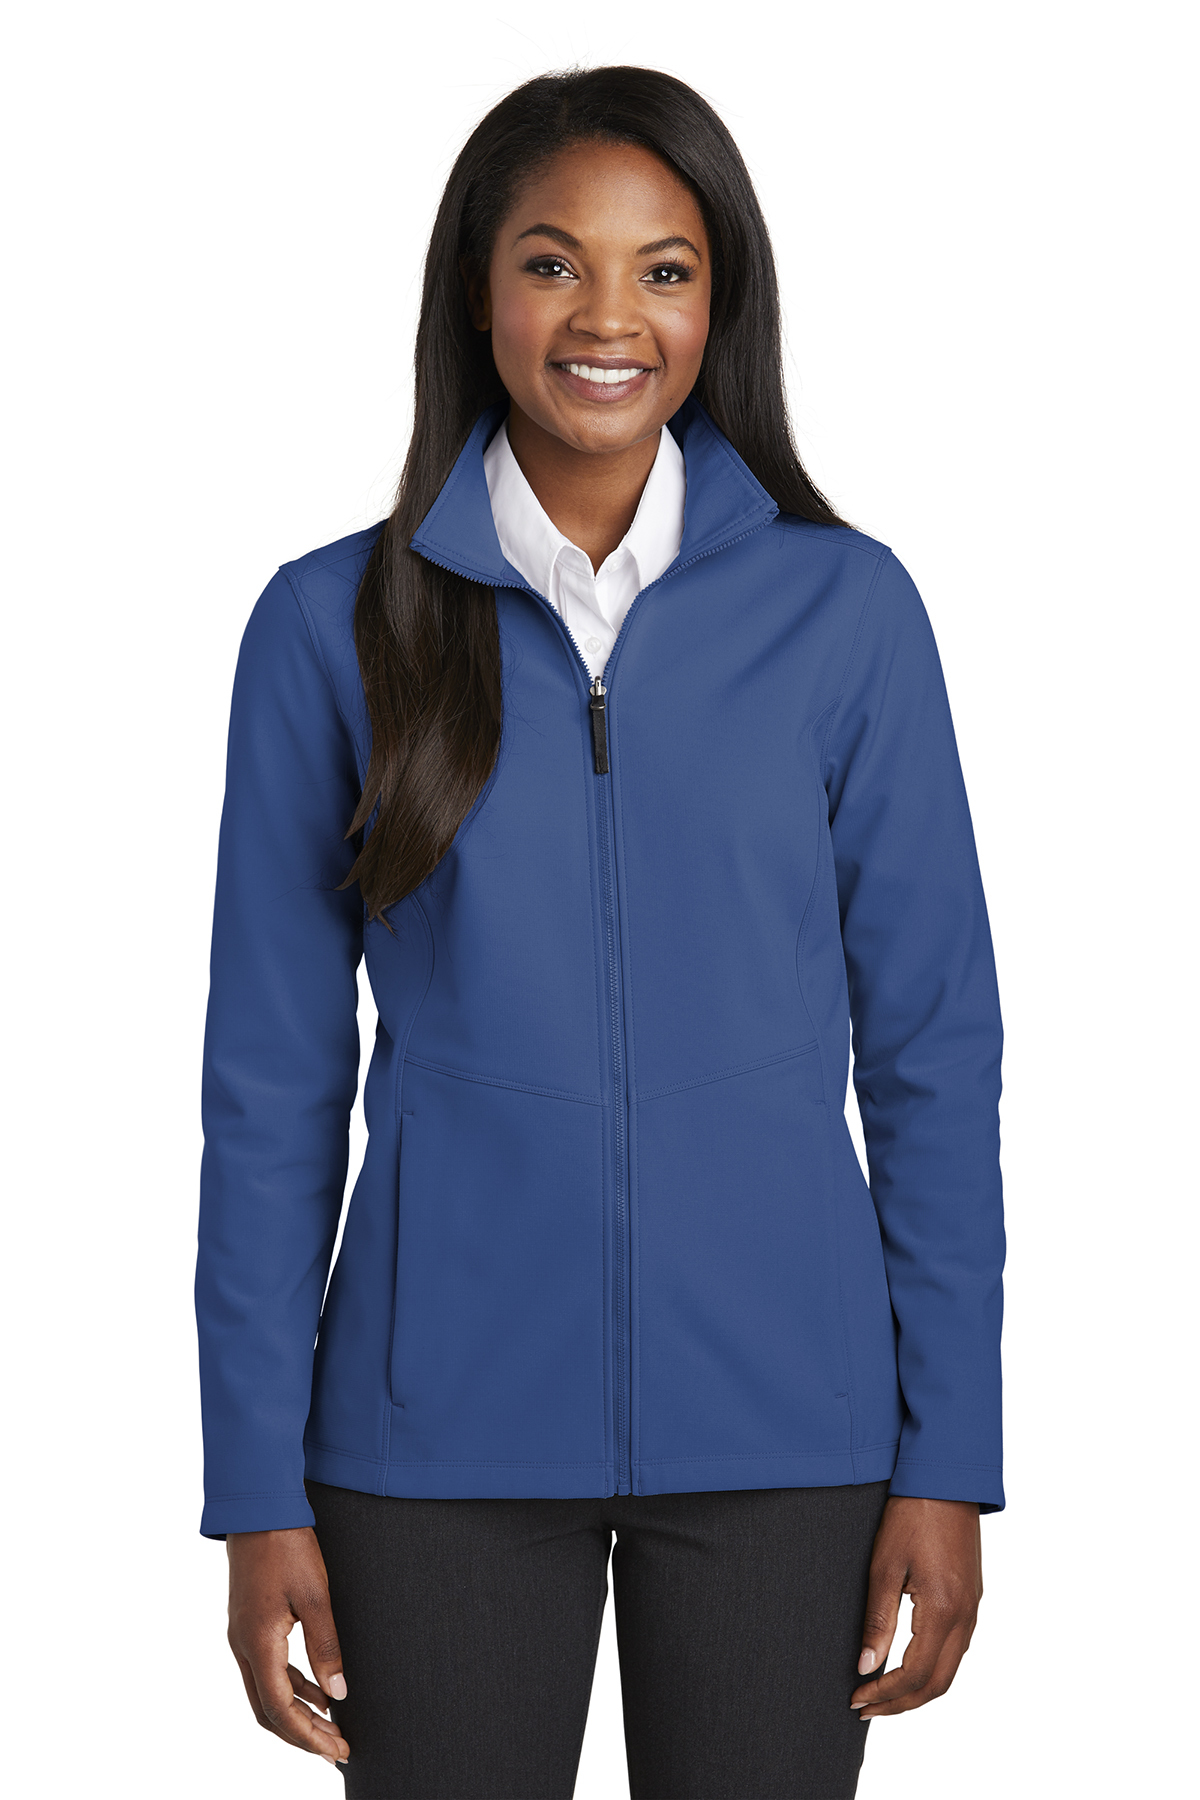 Port Authority L901 - Ladies Collective Soft Shell Jacket